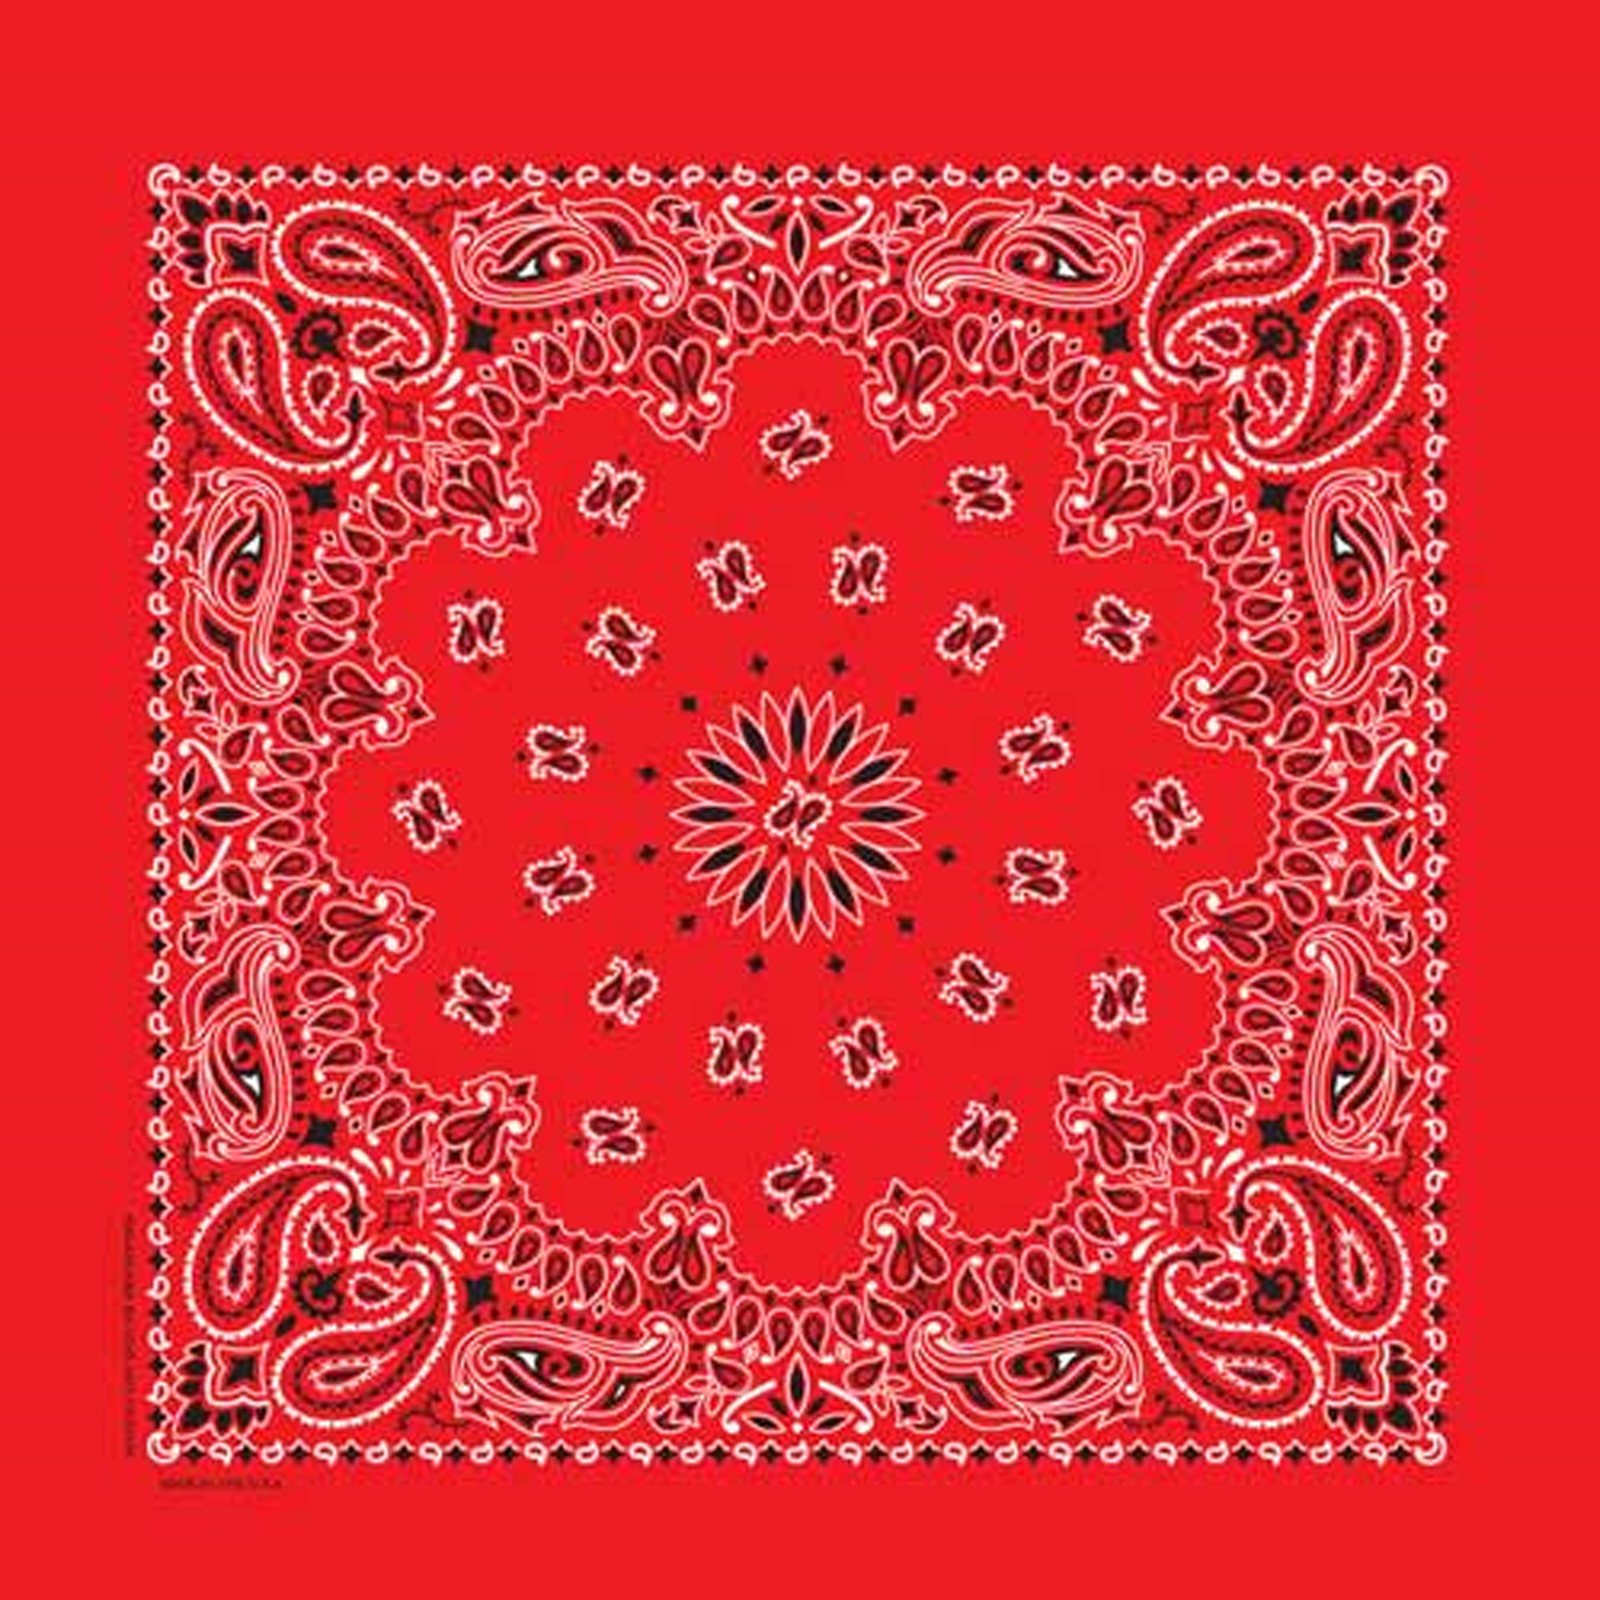 Paisley Western Cotton Bandana in Red - Rockmount